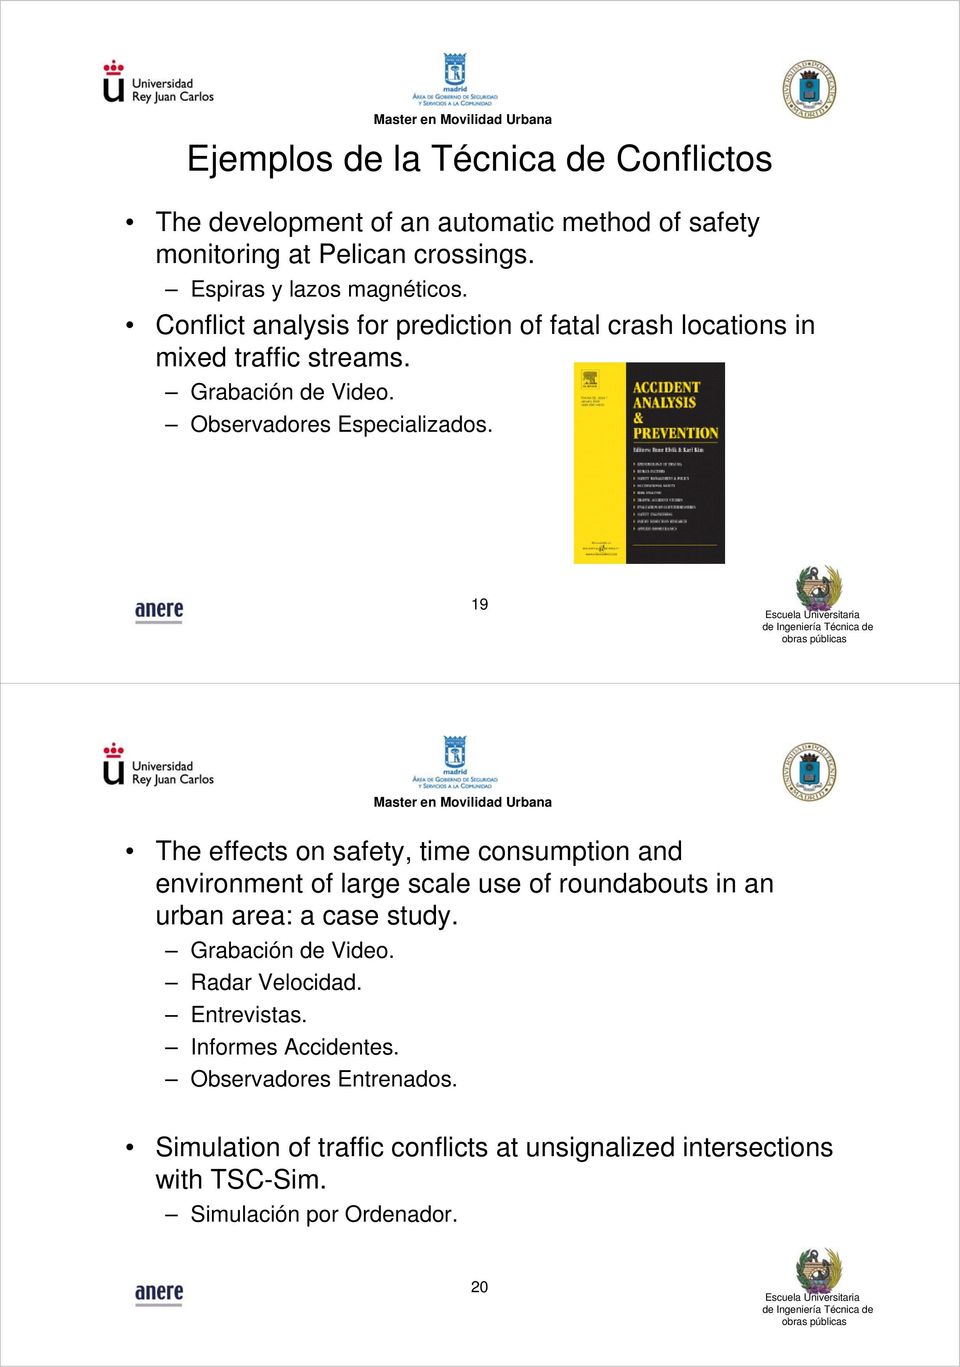 9 9 The effects on safety, time consumption and environment of large scale use of roundabouts in an urban area: a case study. Grabación de Video.